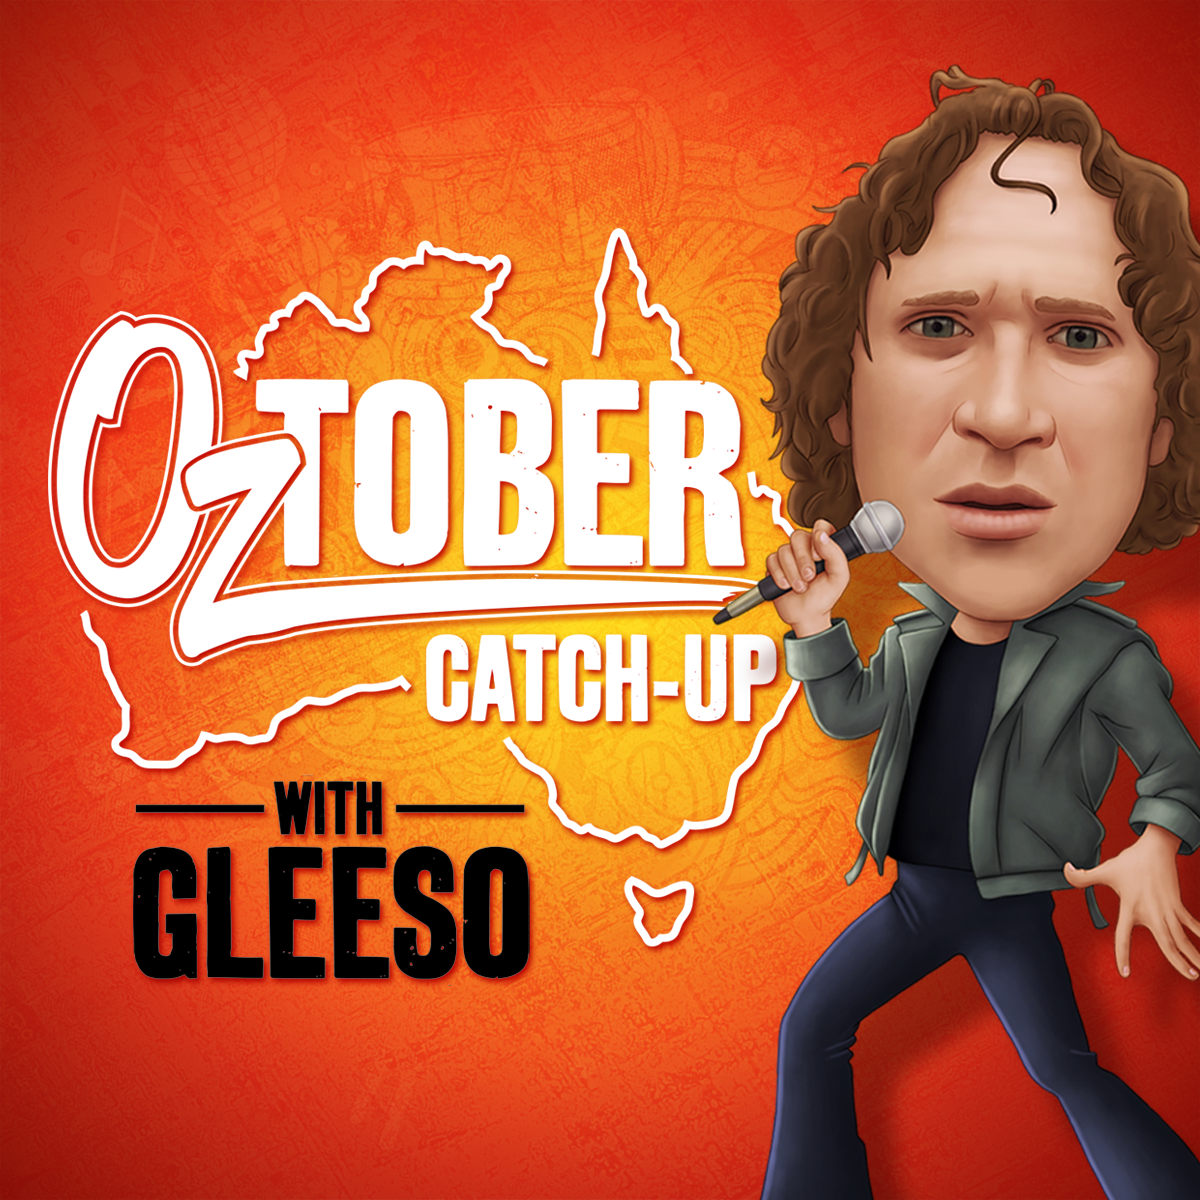 Oztober Catch-Up with Gleeso - Shannon Noll